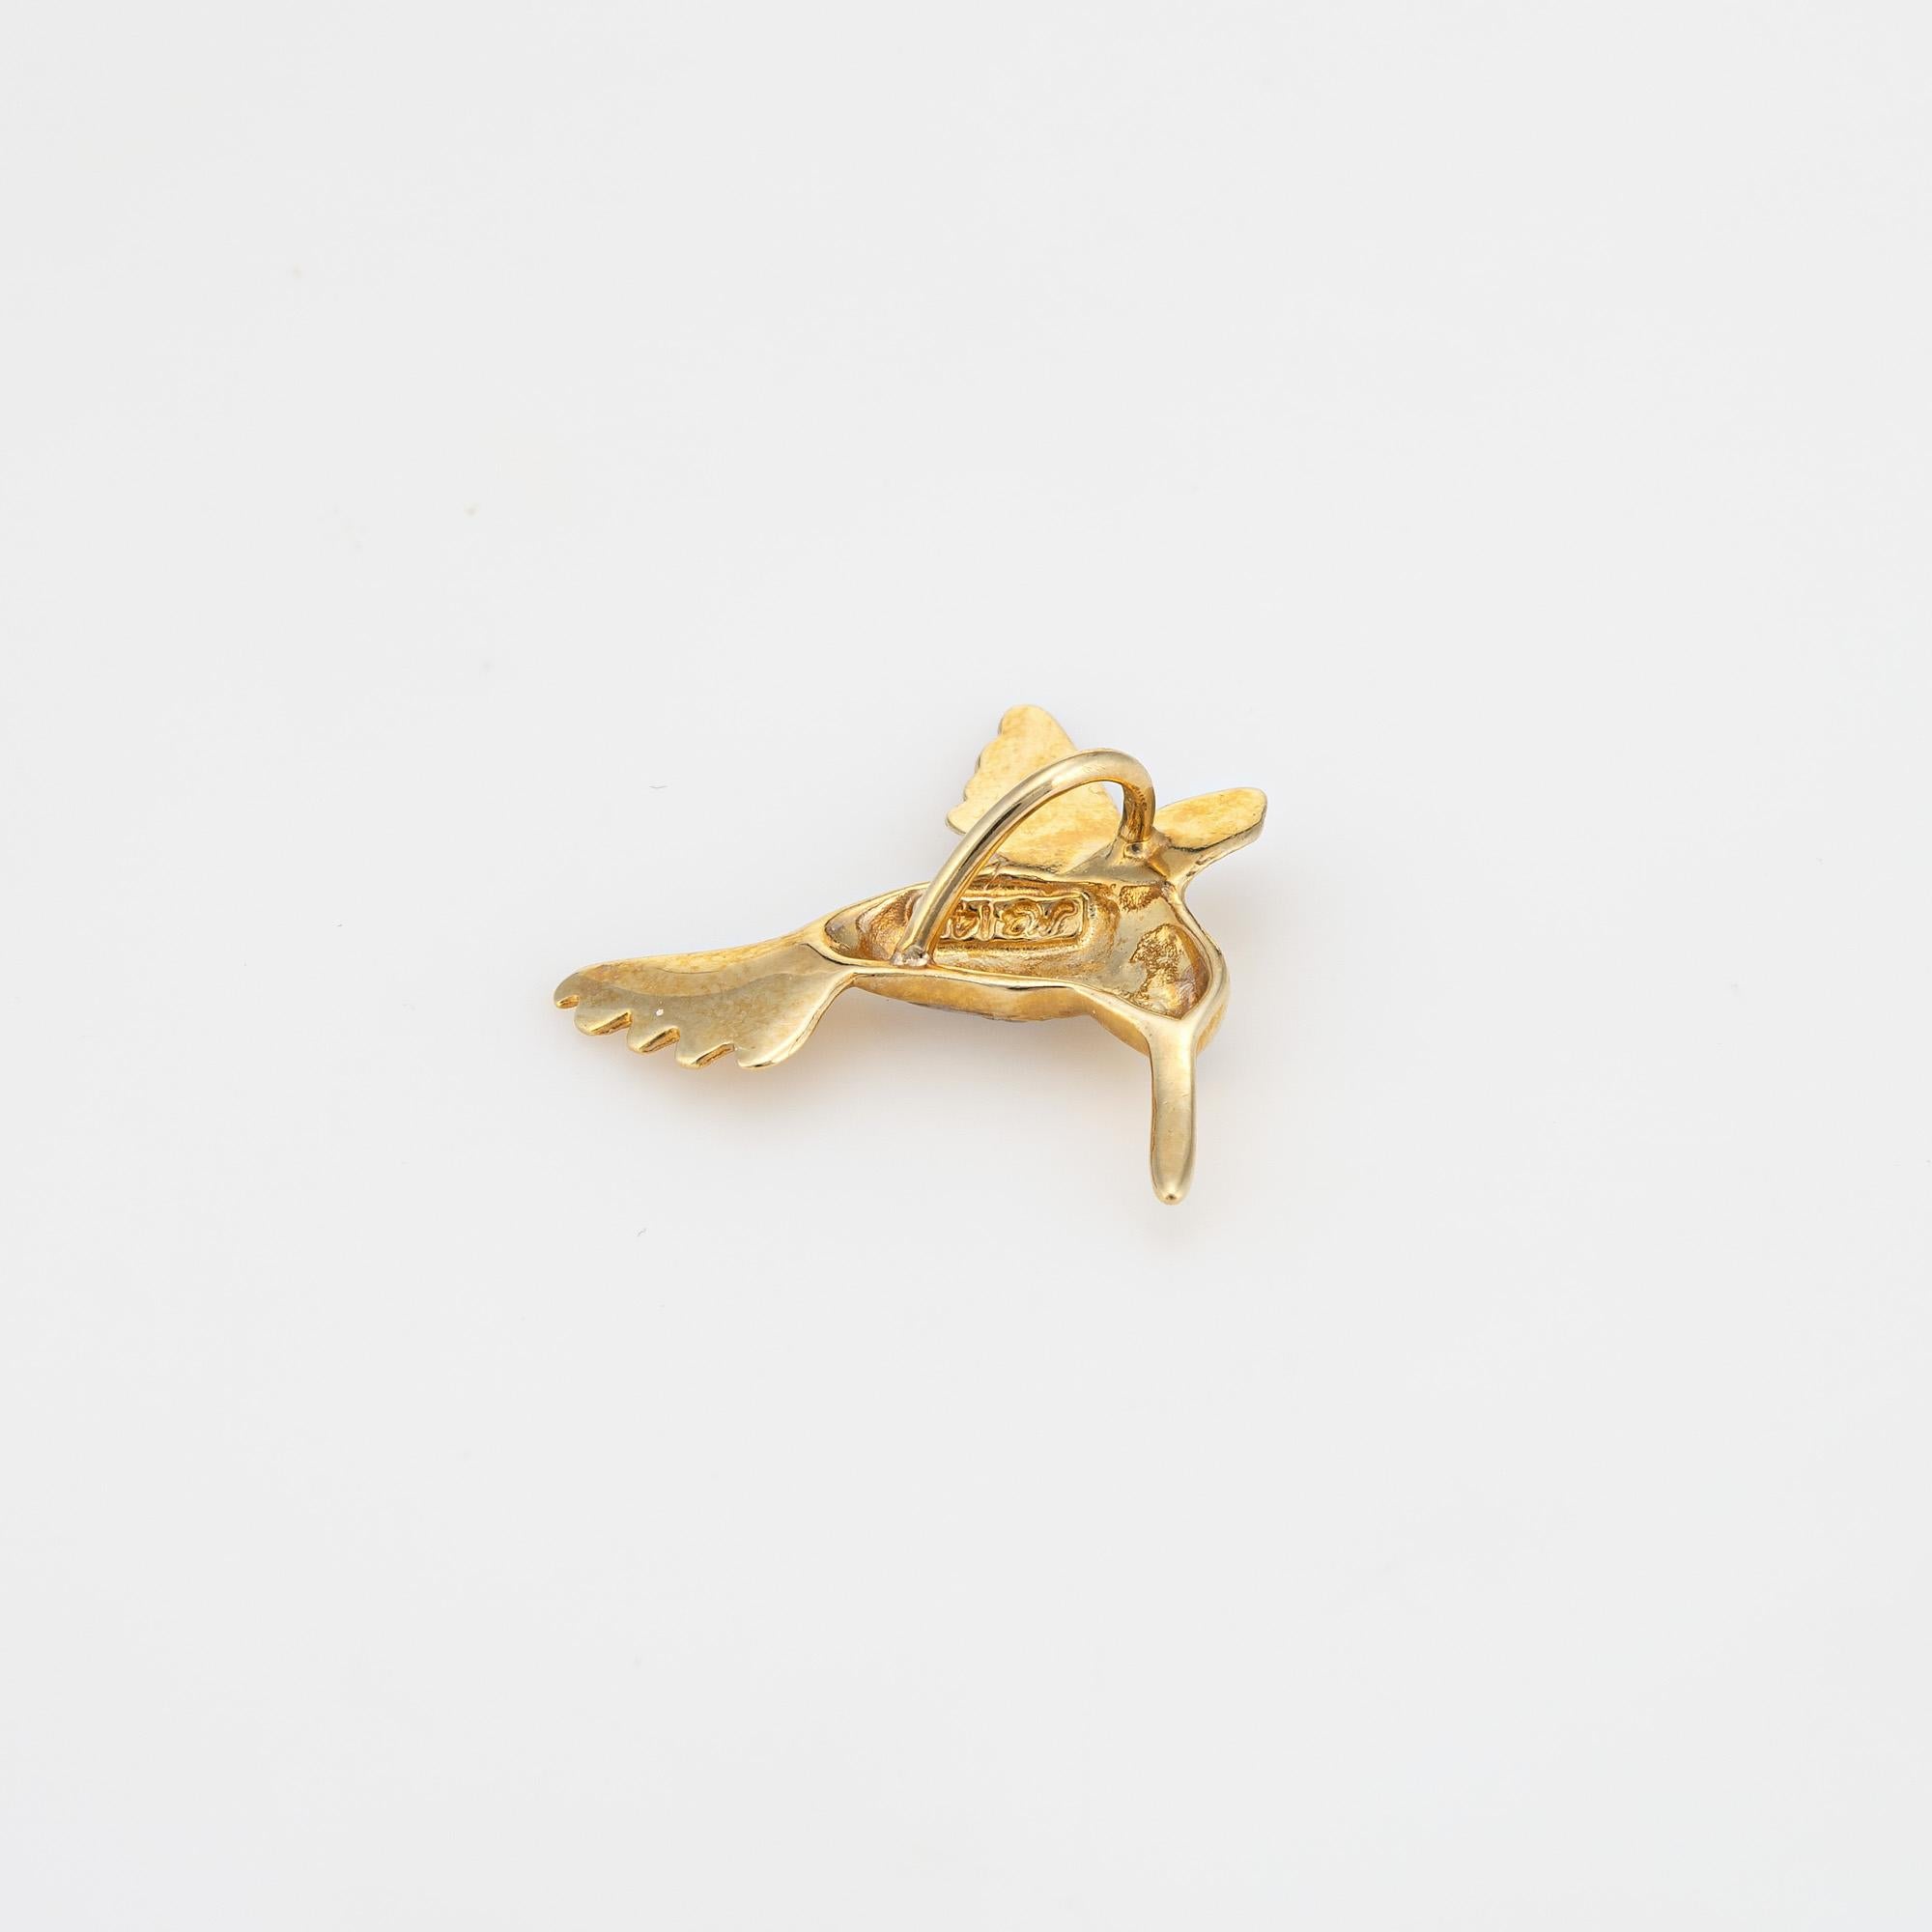 Finely detailed vintage Hummingbird pendant crafted in 14k yellow gold.  

Small in scale, the hummingbird is one of nature's most graceful creatures. Crafted with intricate attention to detail, the pendant depicts the hummingbird in mid-flight, its